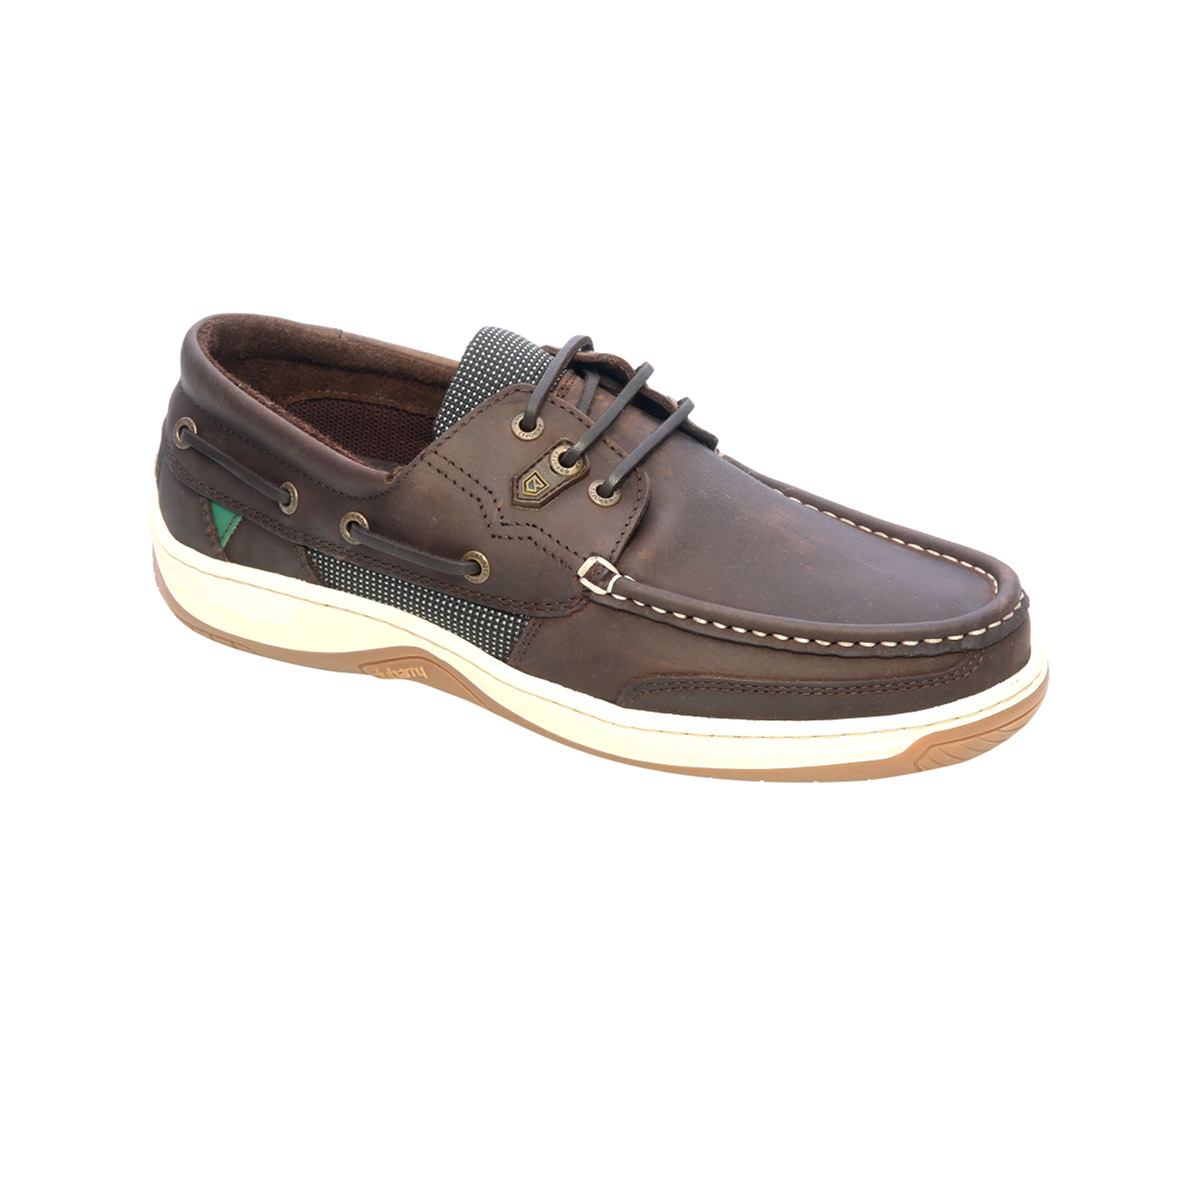 Dubarry Regatta chaussures bateau ExtraFit homme donkey brown, taille 41